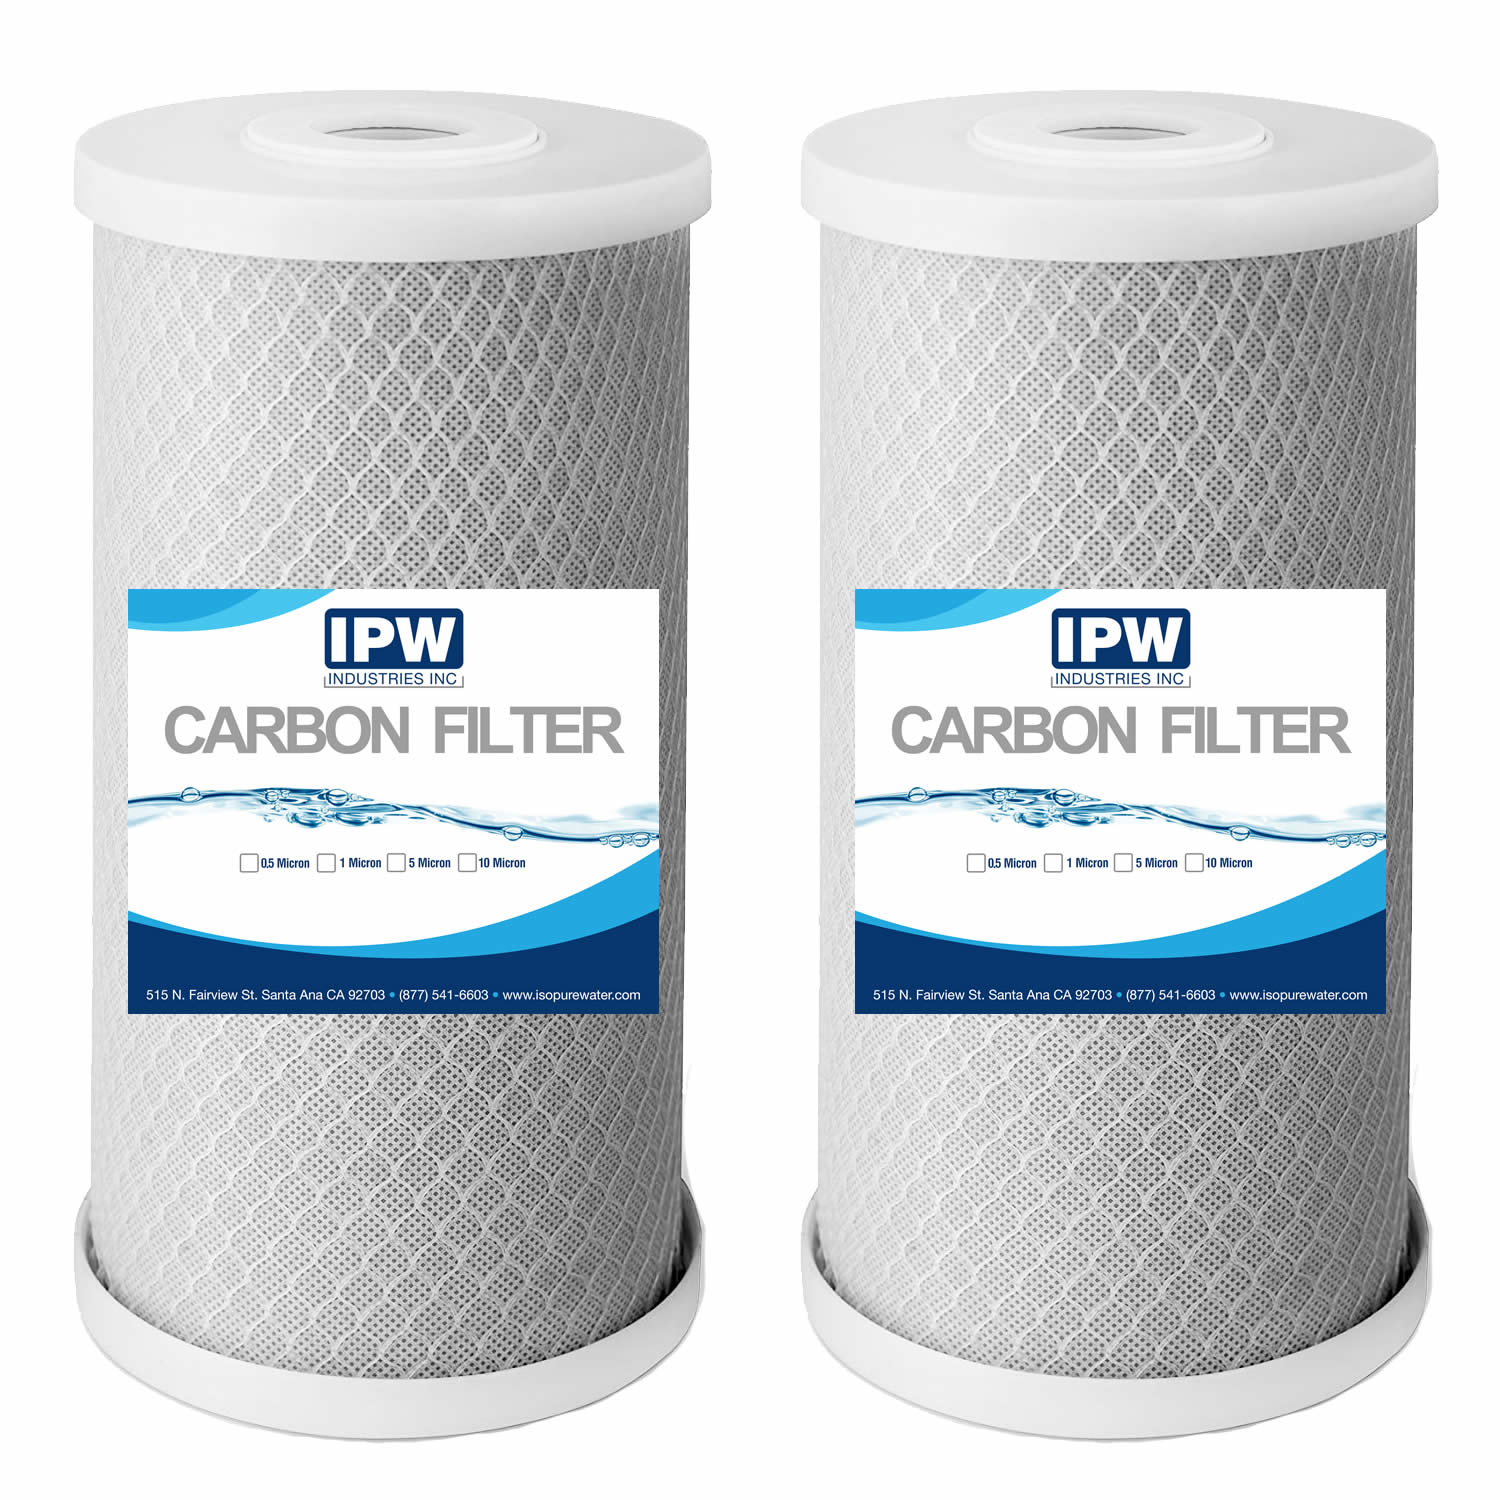 Big Blue Cto Carbon Block Water Filters 4.5" X 10" Whole House Cartridges Well-matched With Cbc Series, Wfhdc8001, Ep And Epm Series (2 Pack) By Ipw Industries Inc.